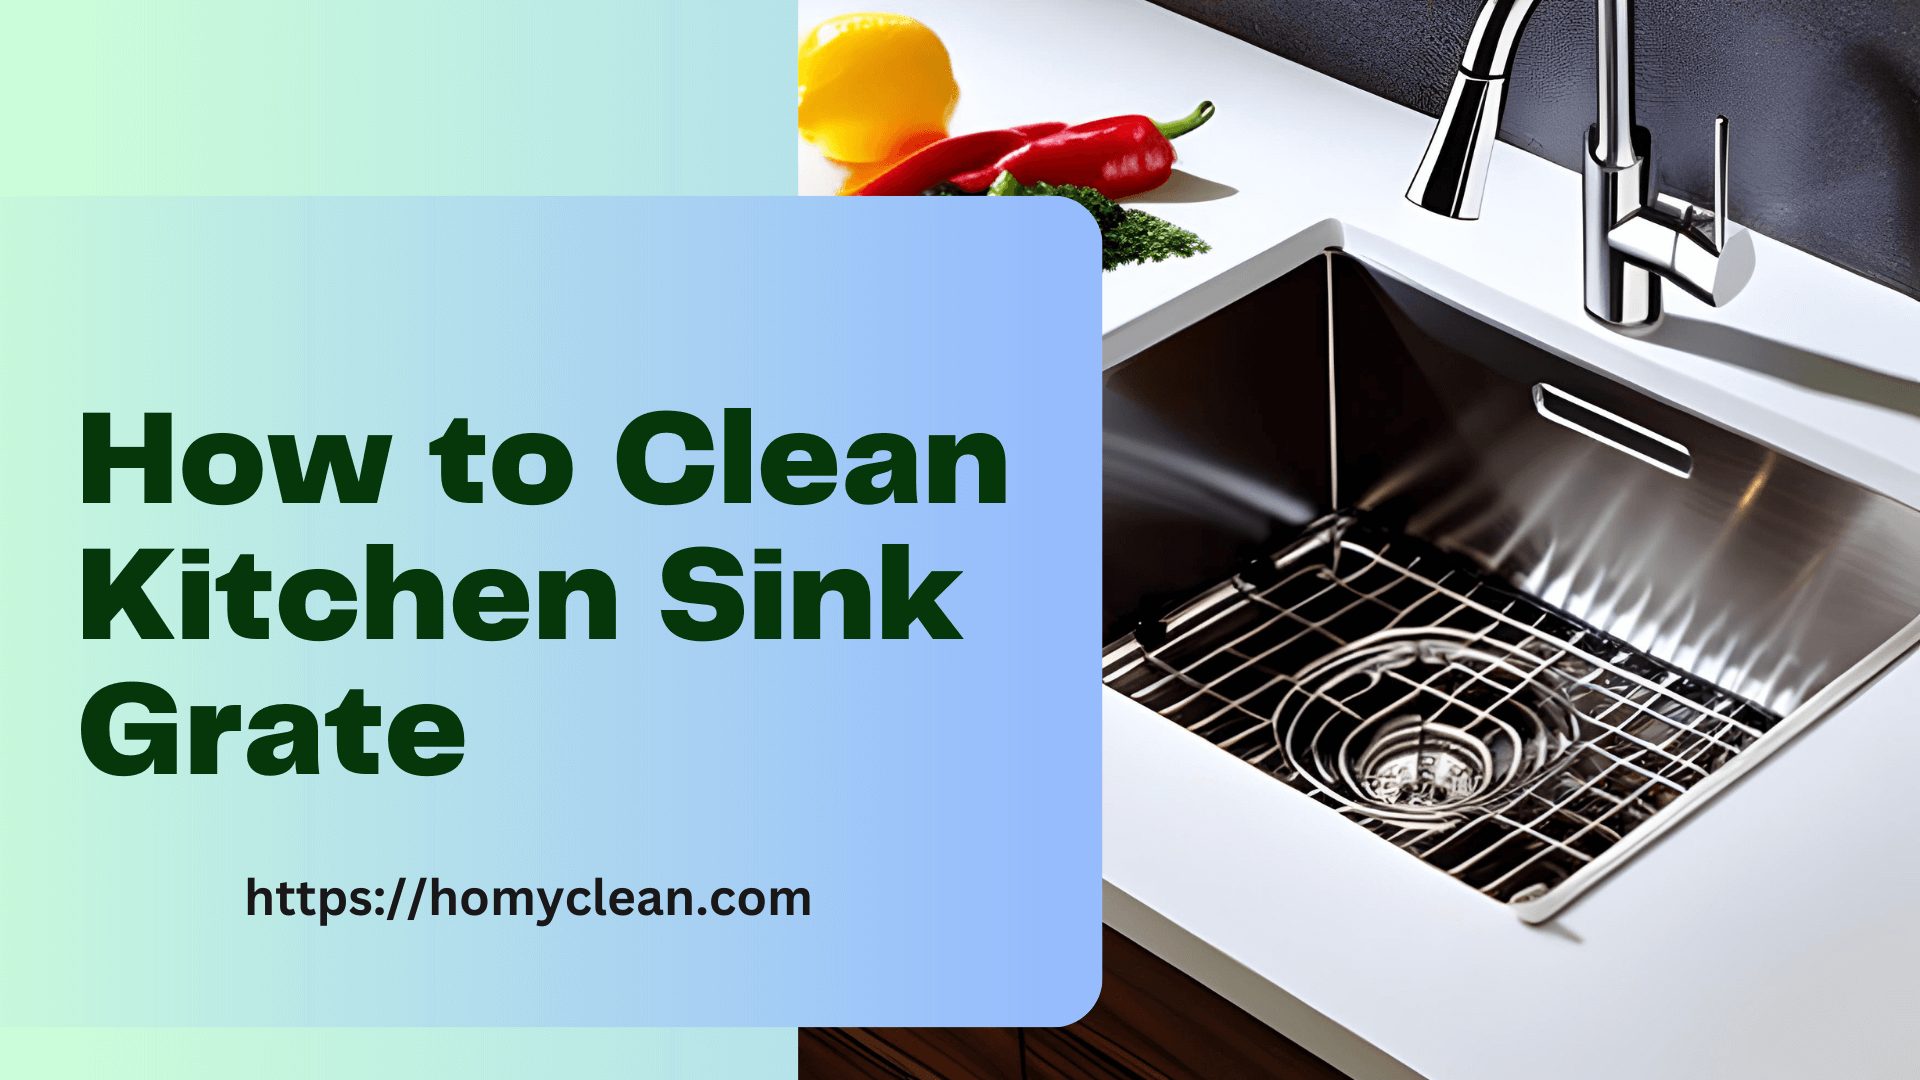 How to Clean Kitchen Sink Grate